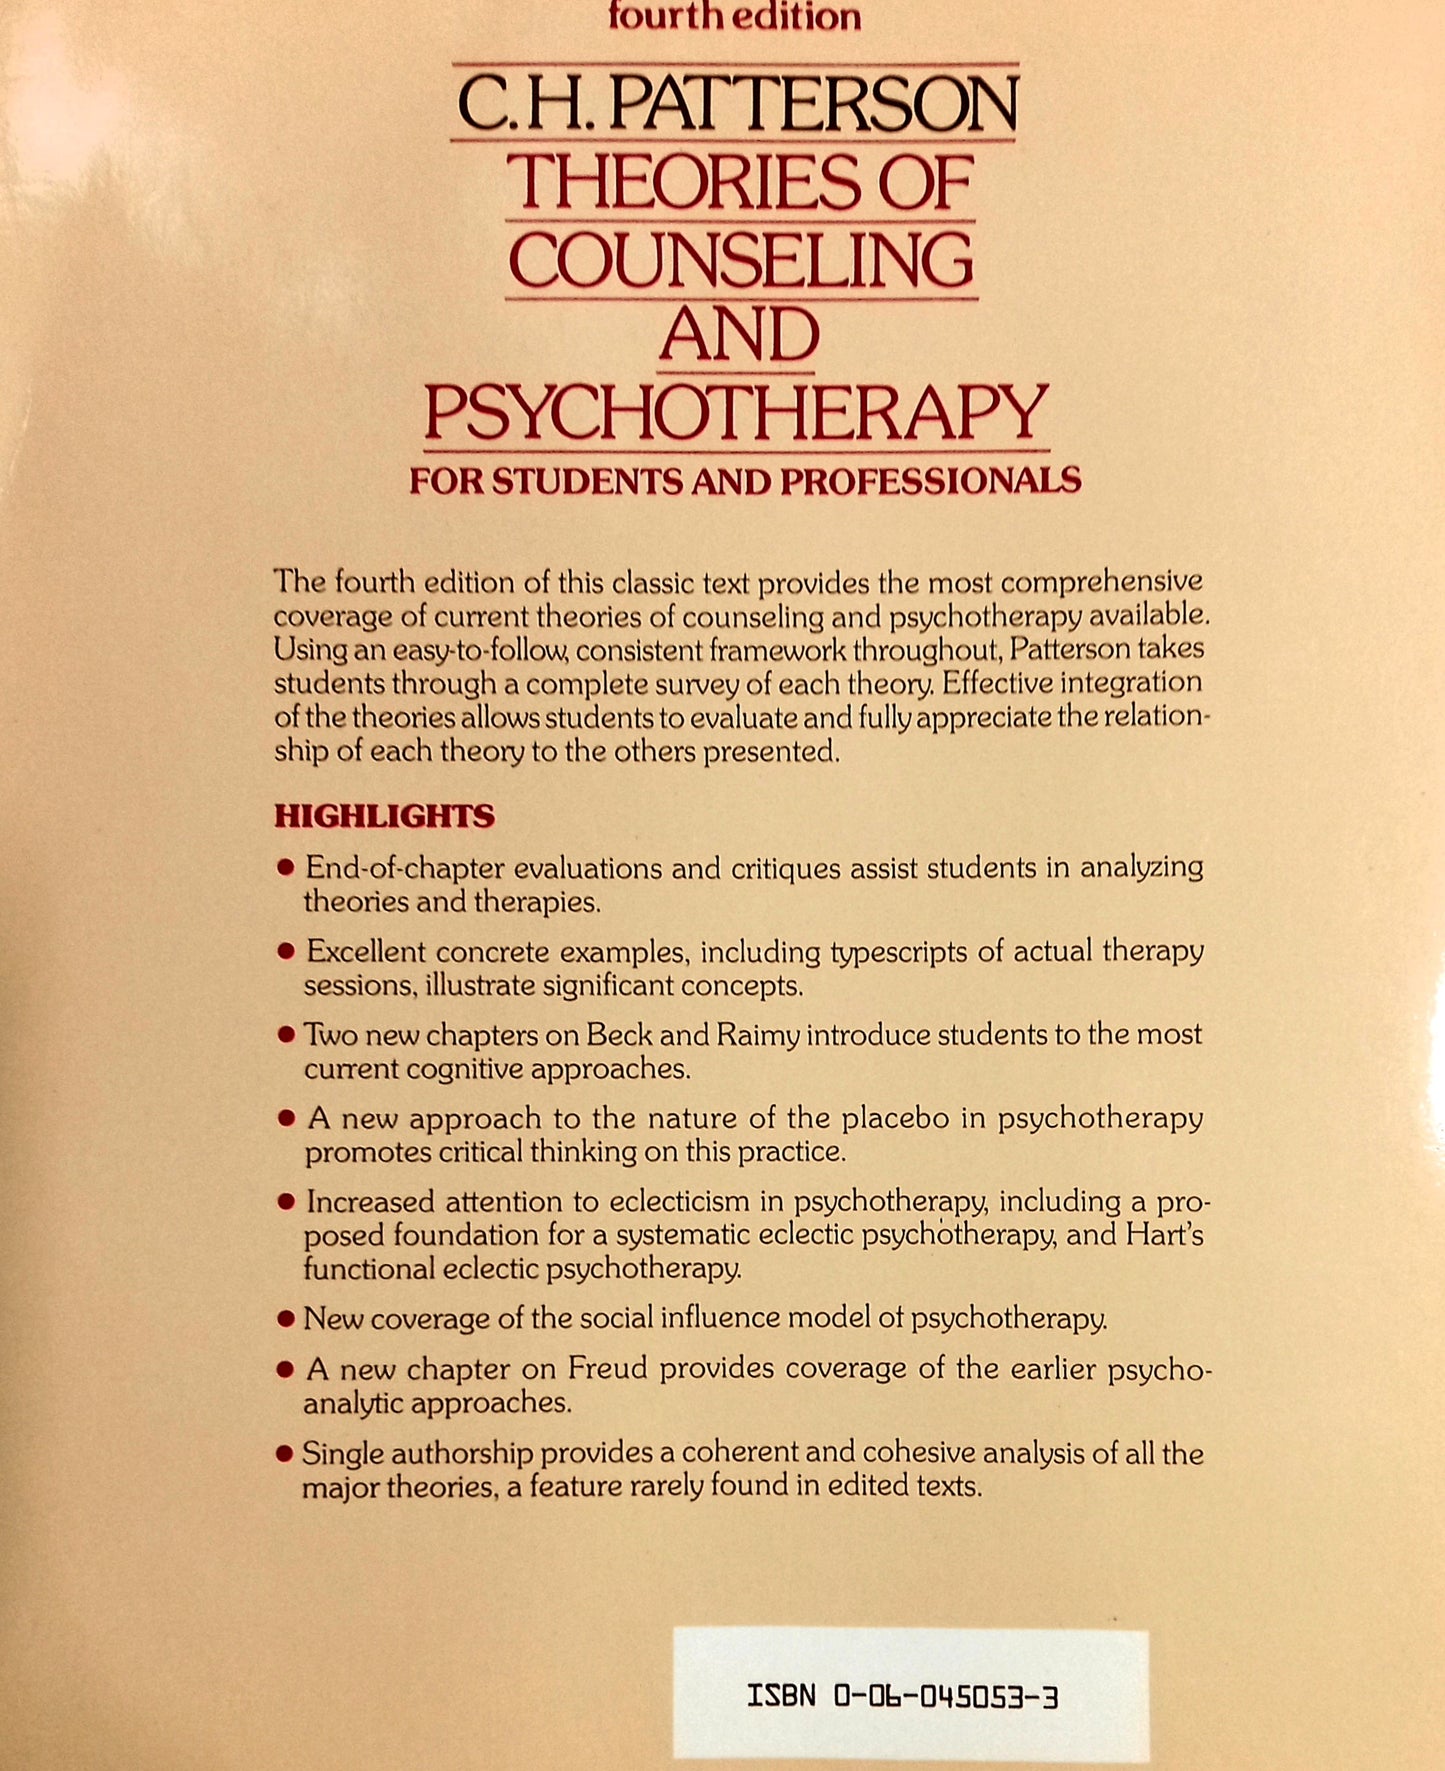 Theories of Counseling and Psychotherapy (Fourth Edition)